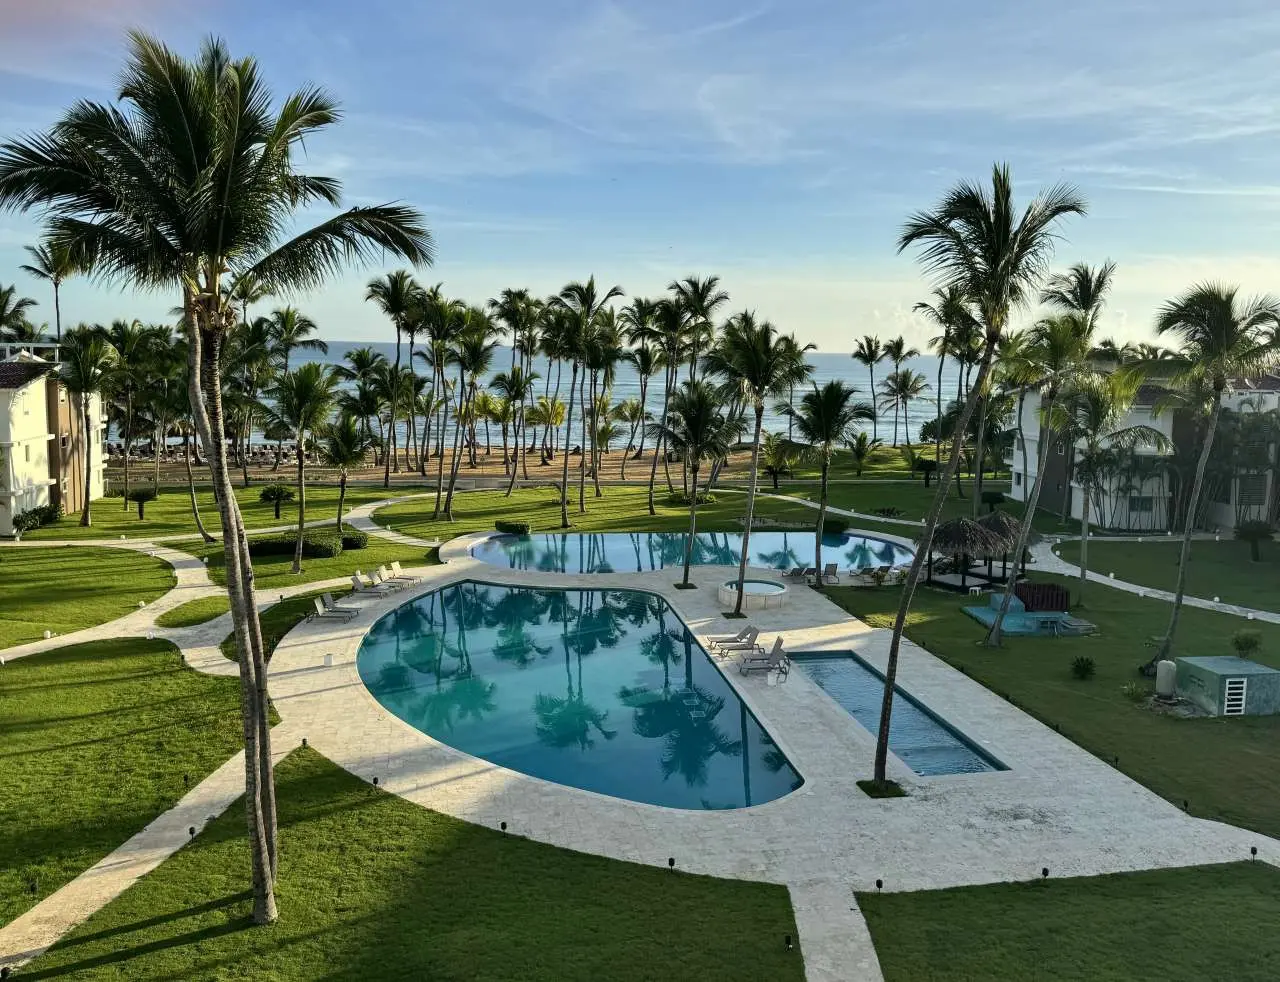 View from the Ocean View Apartments penthouse overlooking the pool, palm trees, green space and private beach